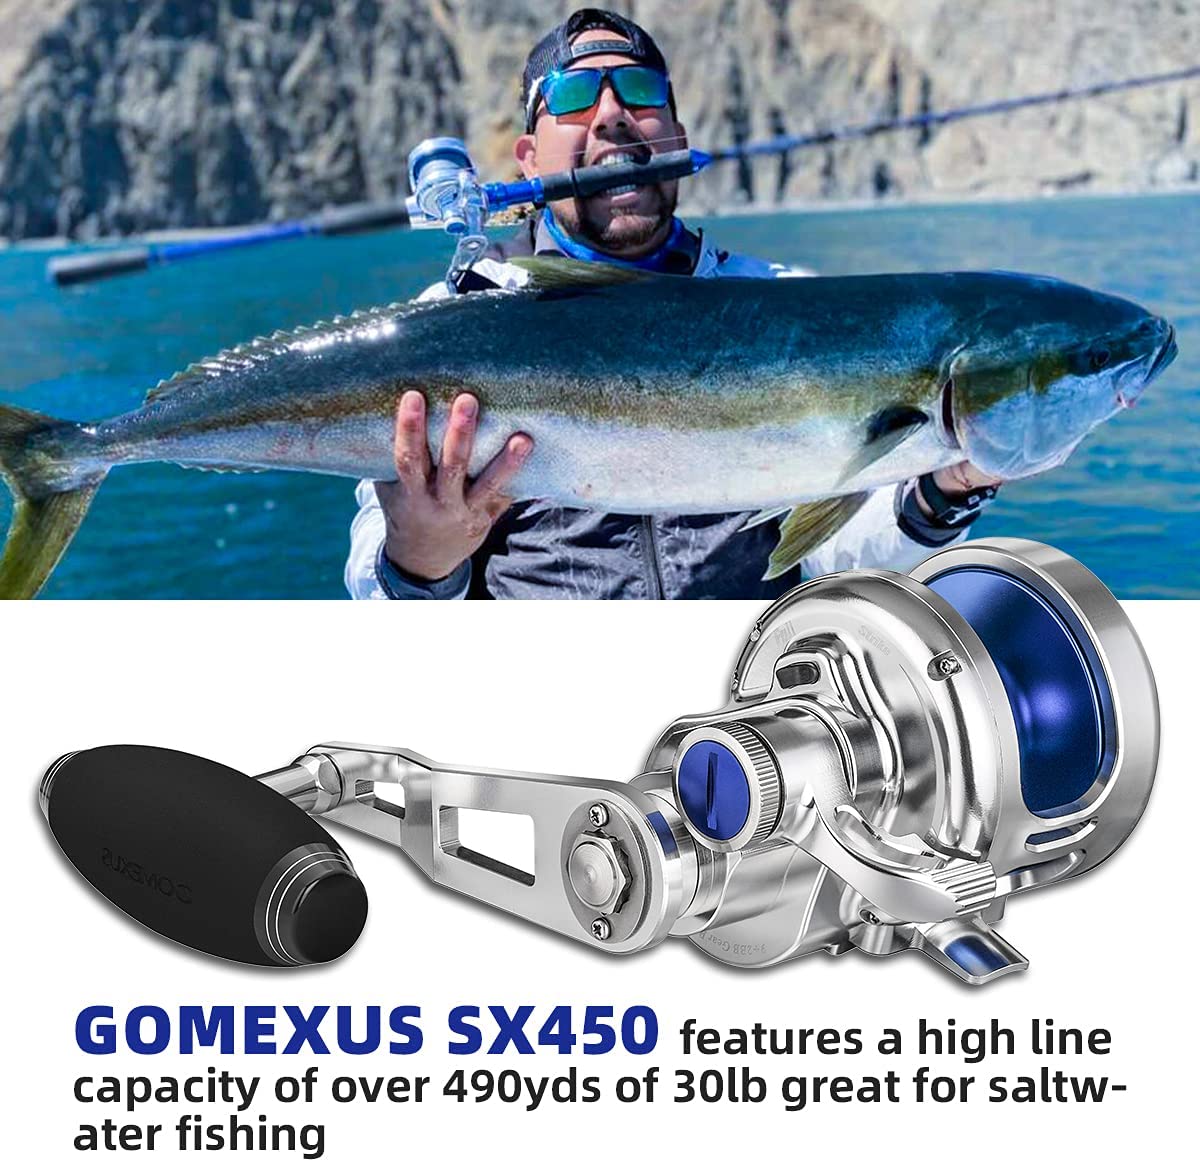 Gomexus double handle with reel stand, Sports Equipment, Fishing